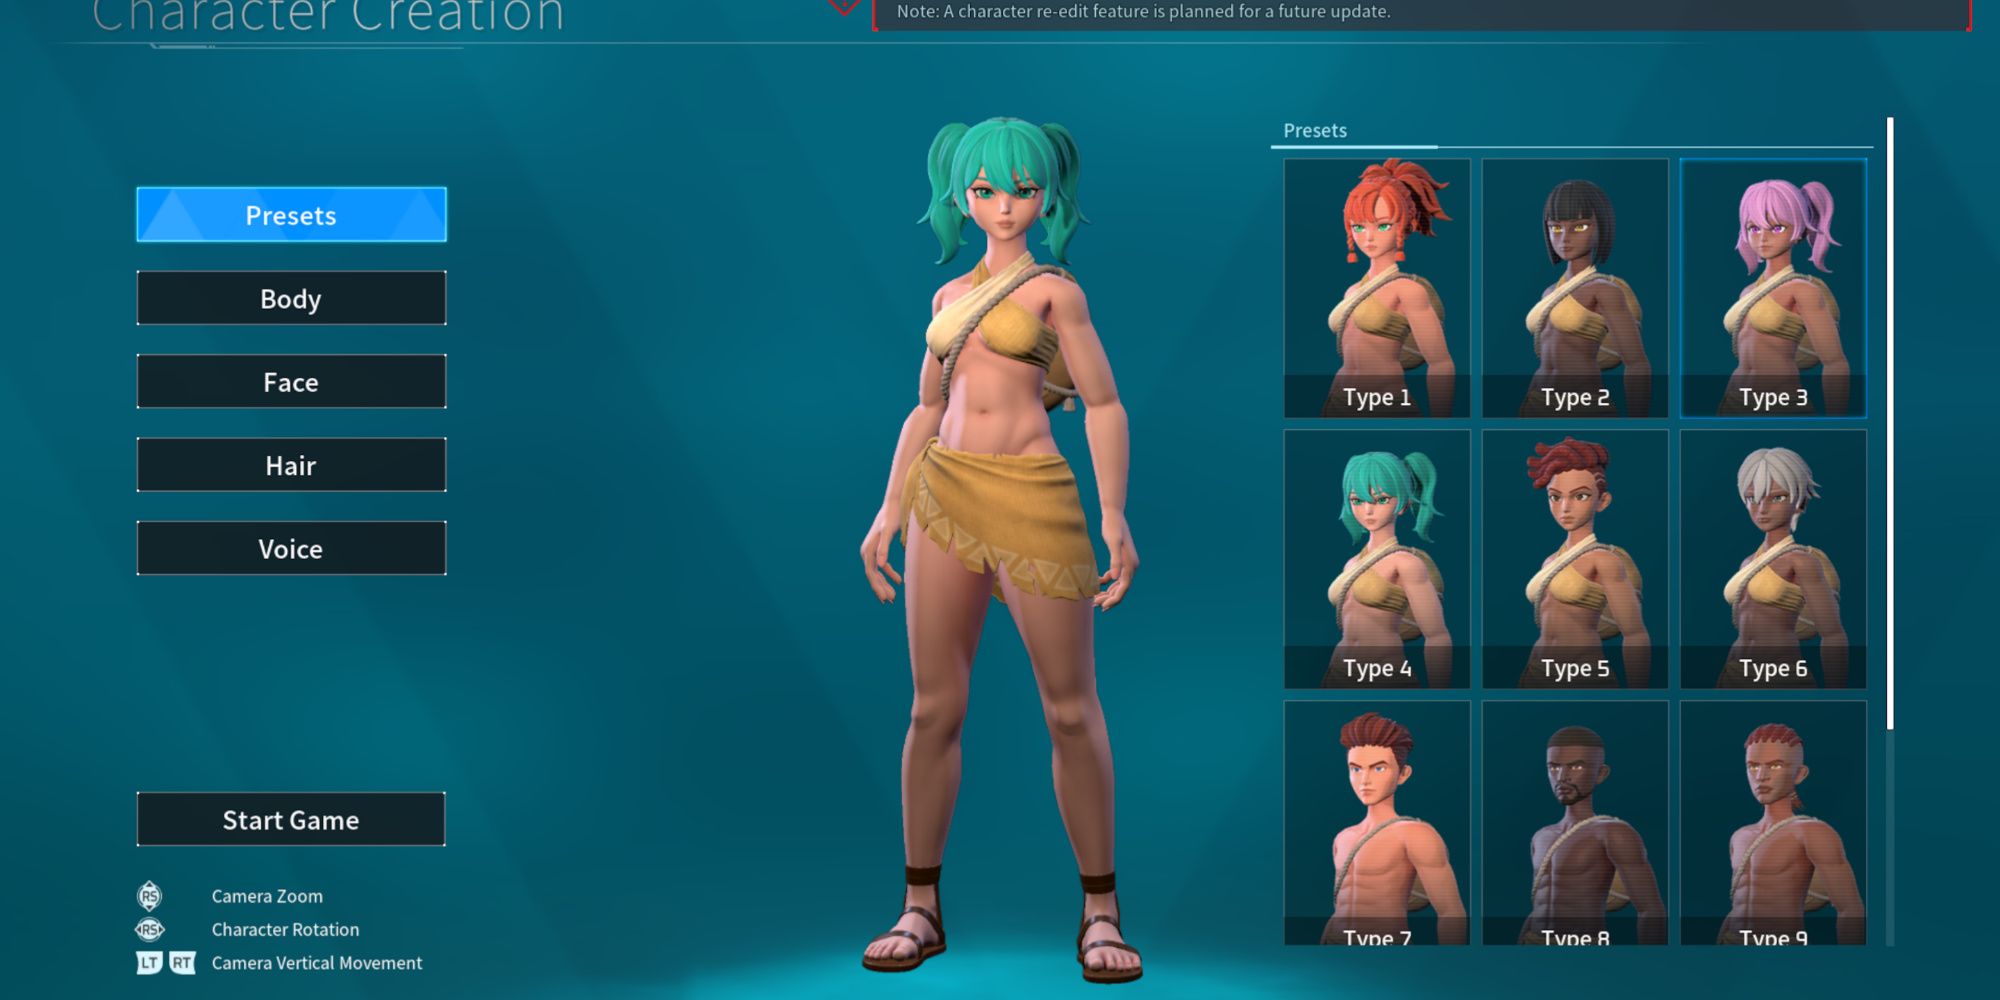 The character creator in Palworld